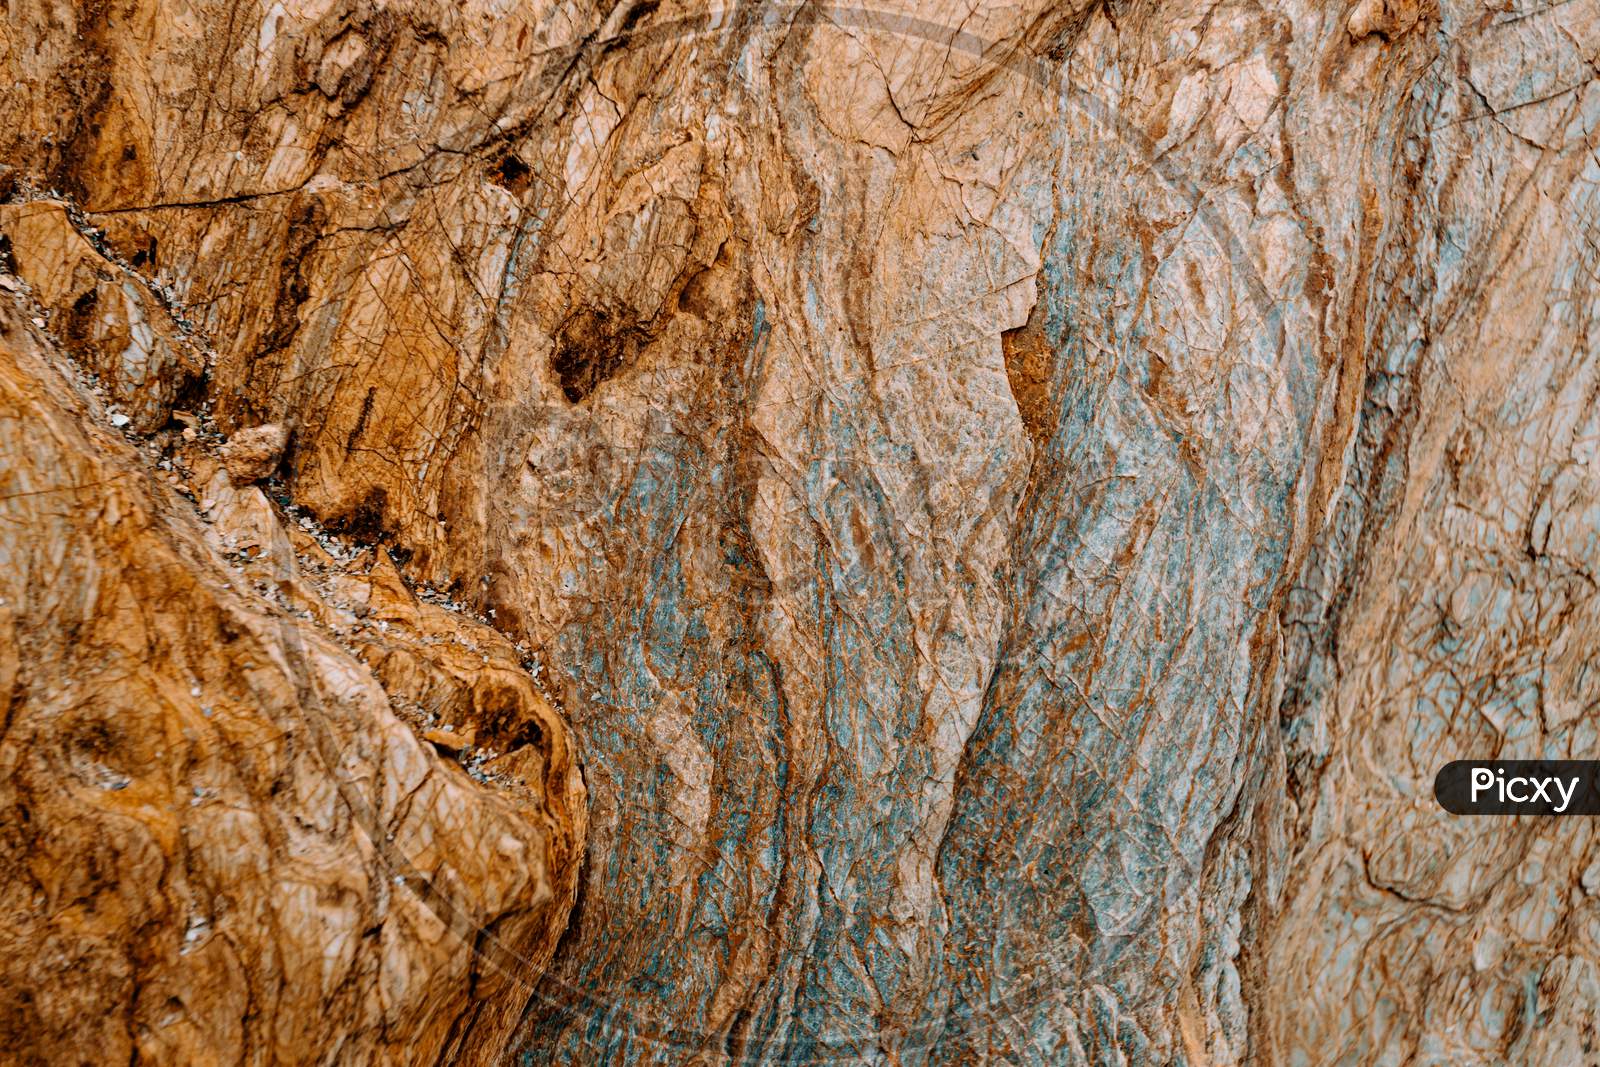 Flat Background Of A Brown With Blue Tones Rock With Rocky Texture